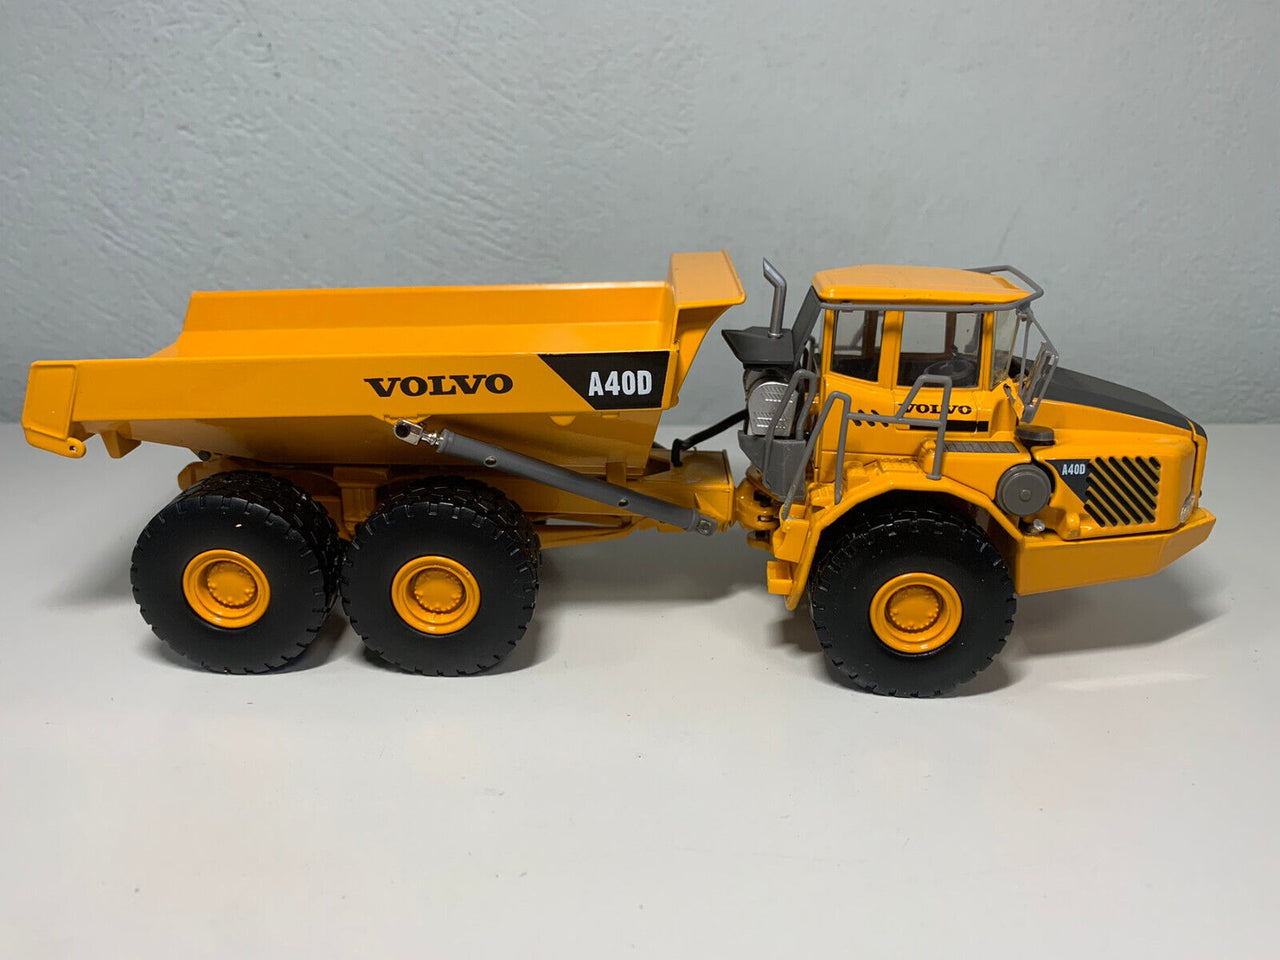 10267 Volvo A40D Articulated Truck 1:50 Scale (Discontinued Model)